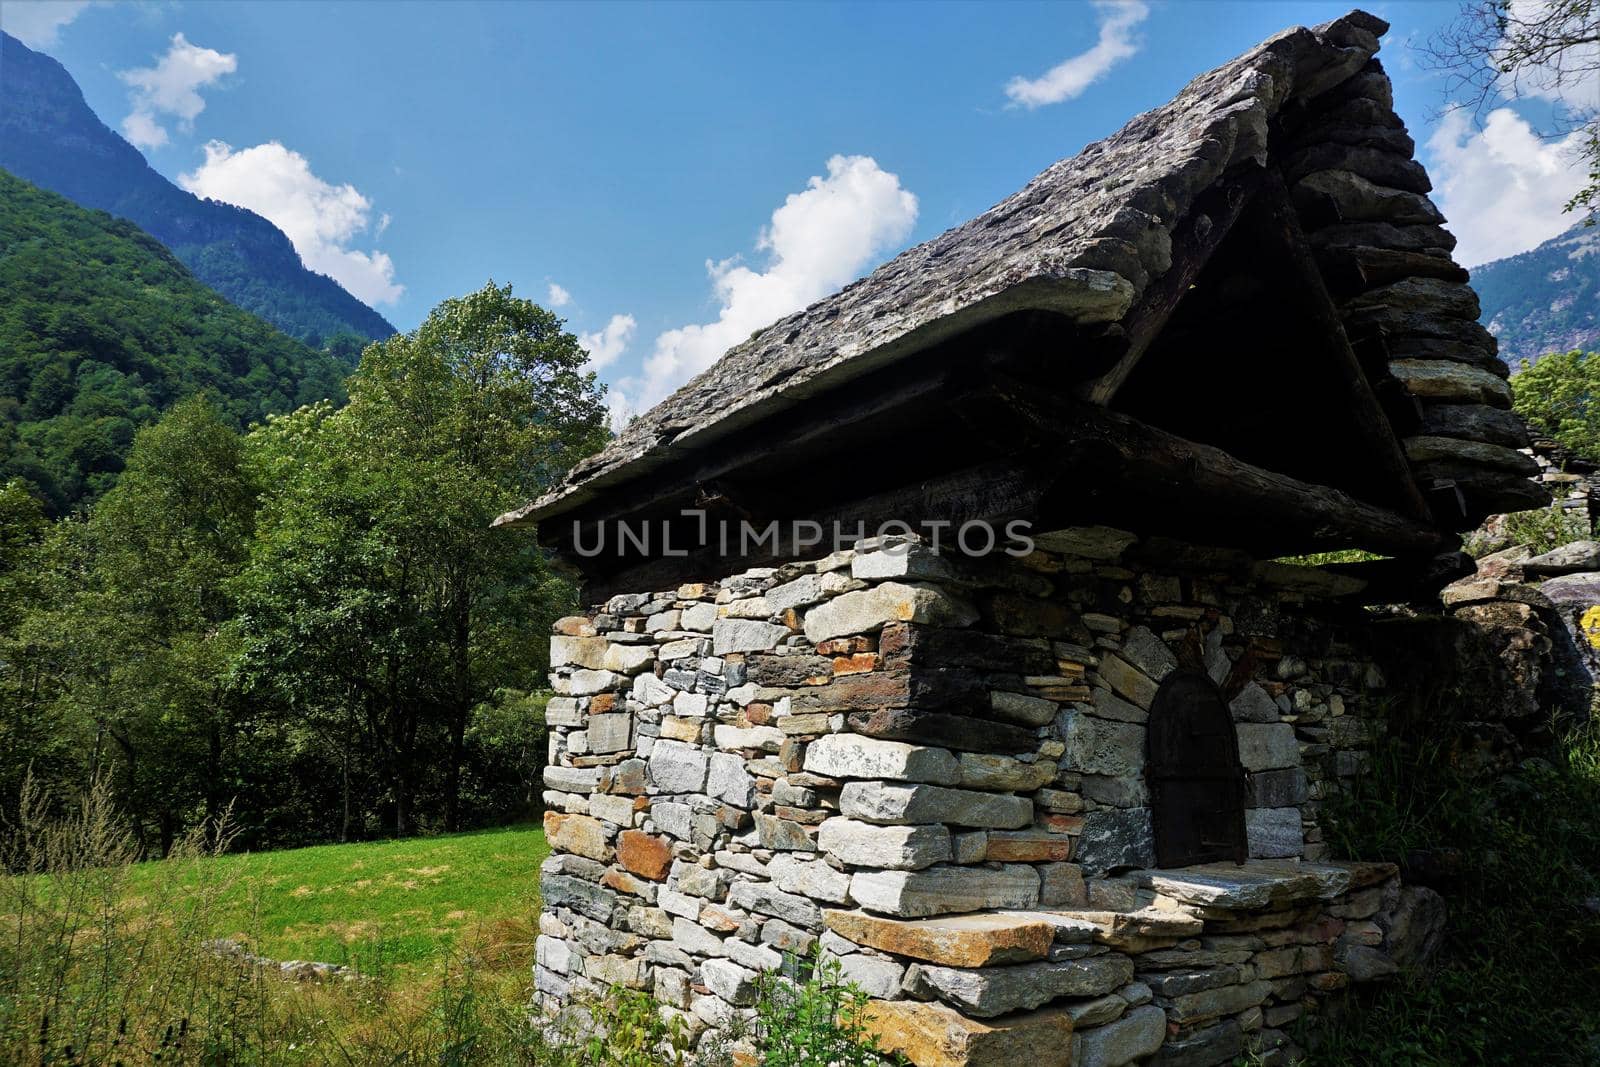 Old bakehouse spotted in the Verzasca valley, Switzerland by pisces2386